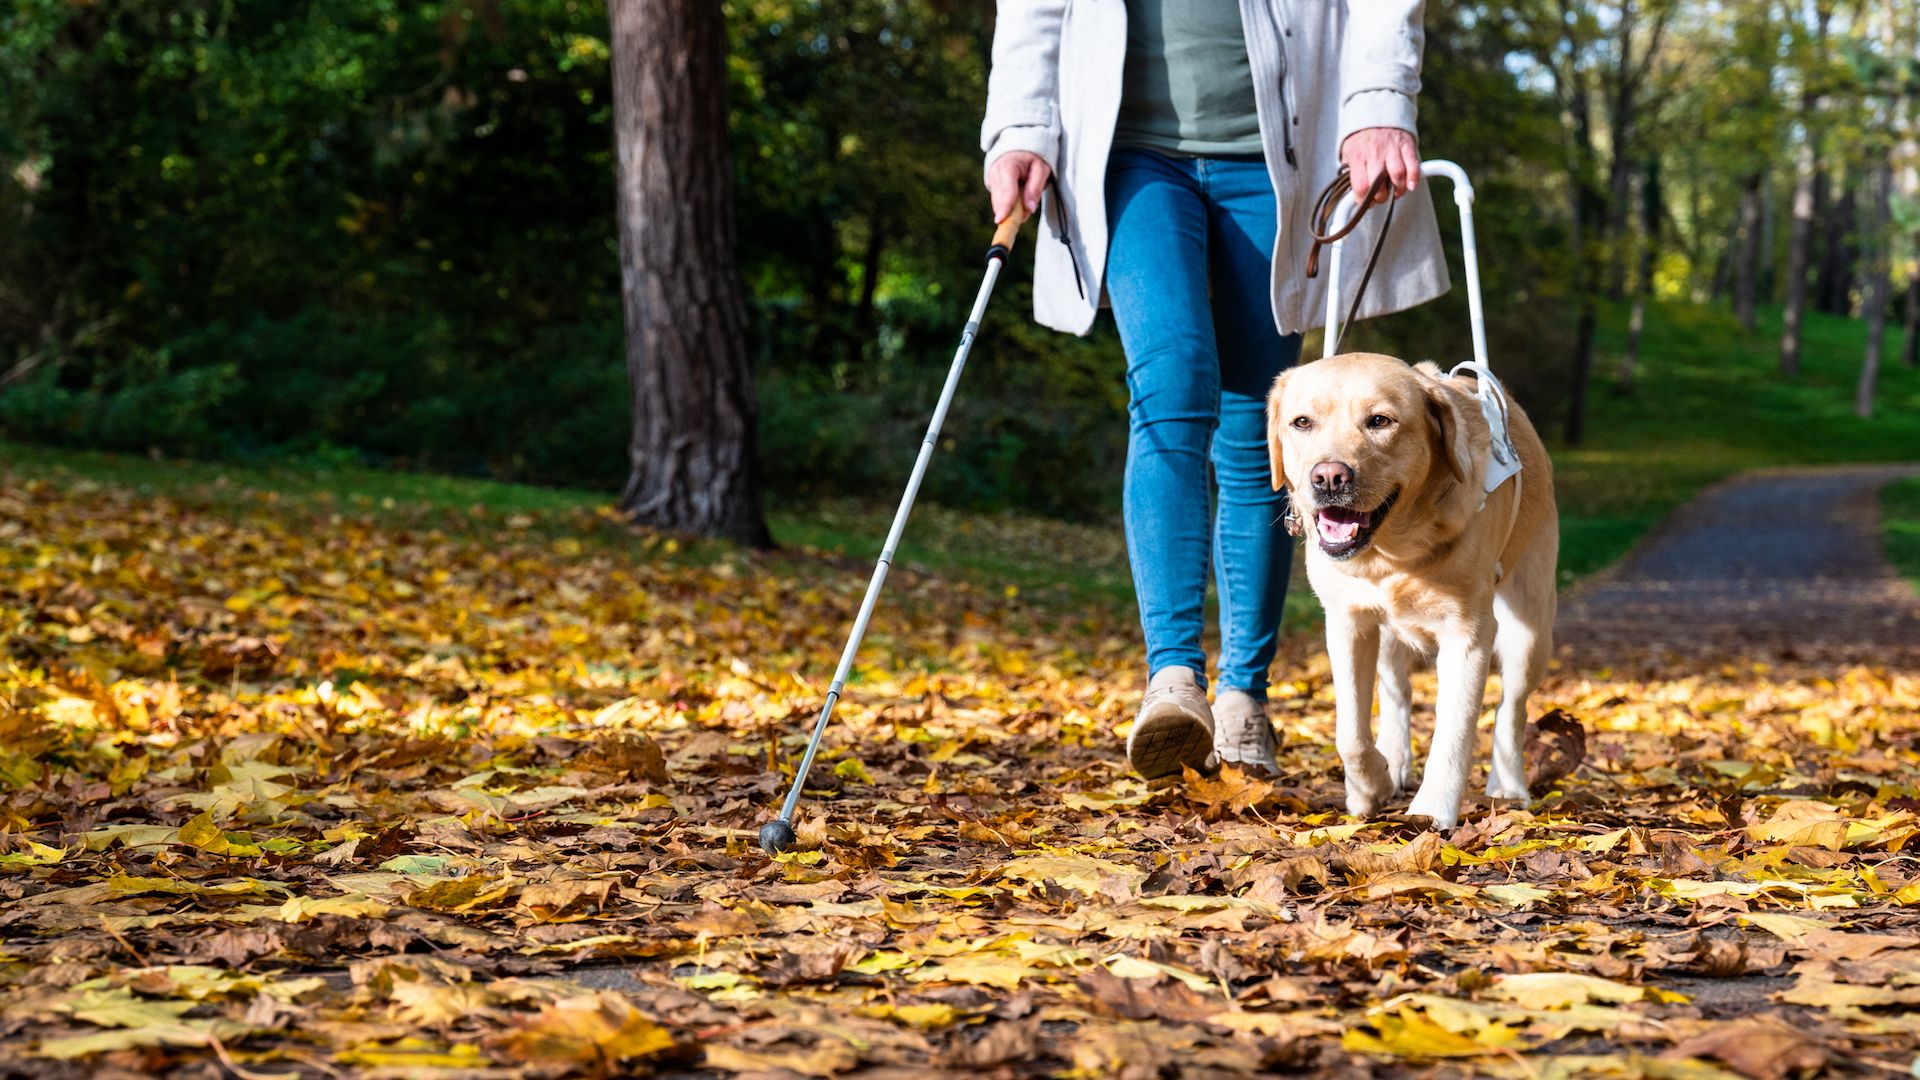 <p>                     Need we say more? Dogs give blind people the freedom to go about their daily lives. They can guide their owners in straight lines, stop at curbs, traffic lights, stairs and help them navigate unfamiliar environments. This mobility can lead to greater independence.                   </p>